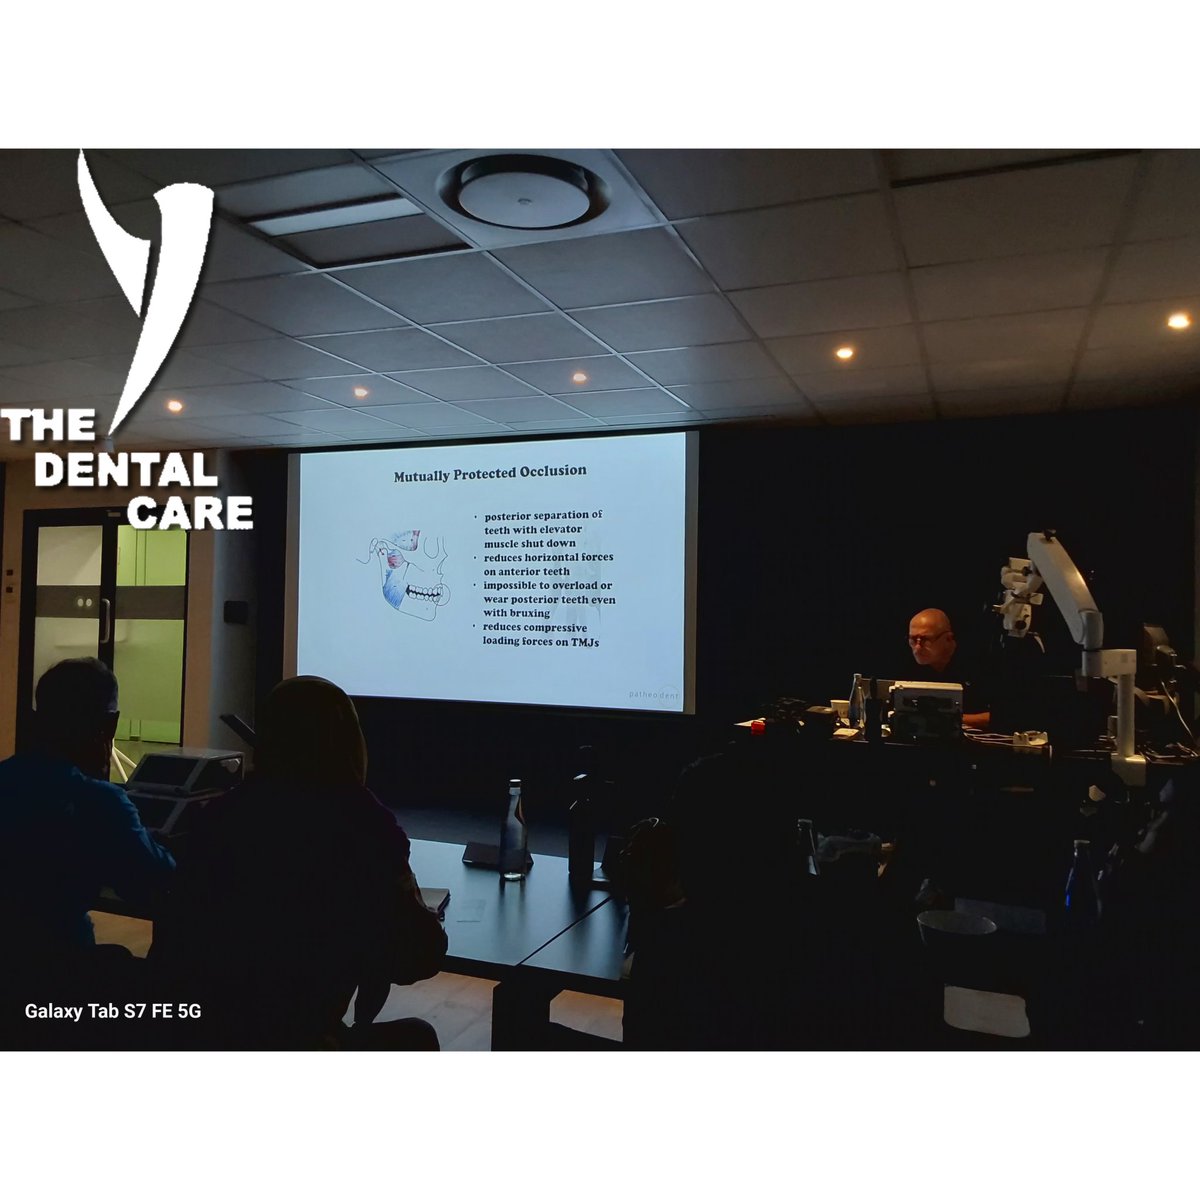 'Excited to enhance my skills at the Implant and Aesthetic Academy in Cape Town! Looking forward to bringing the latest innovations in dental implants and aesthetics back to The Dental Care. #DentalEducation #Implants #Aesthetics'sekodental.co.za